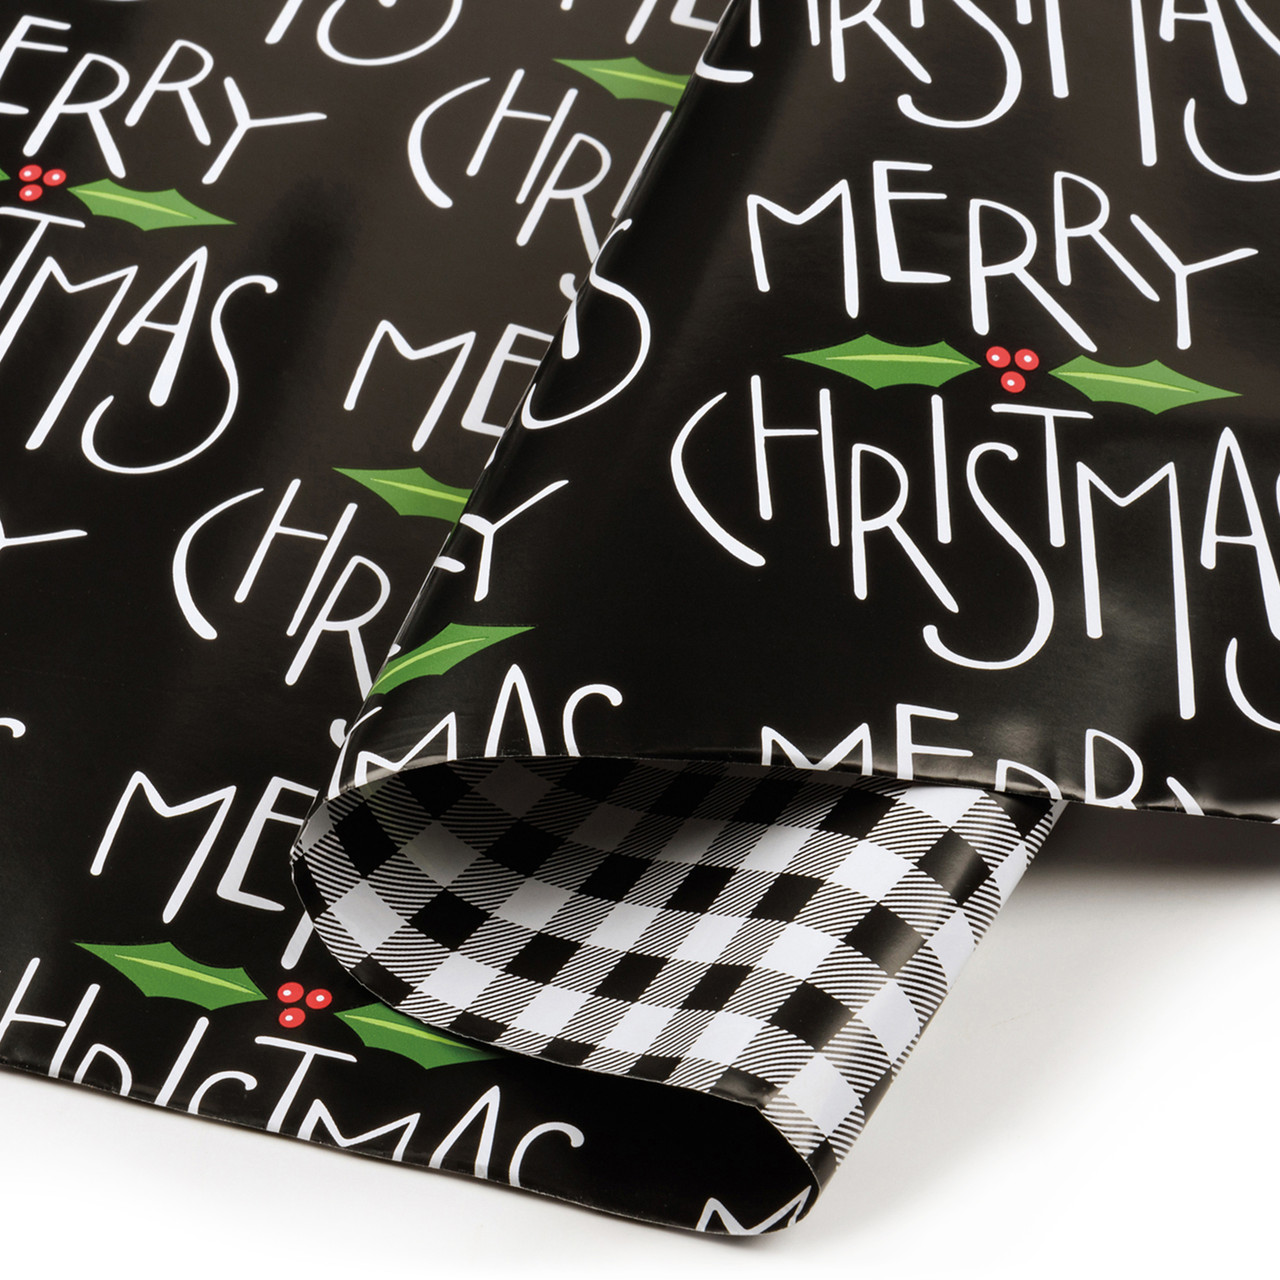 Double Sided Gift Wrapping Paper Roll - Merry Christmas Mistletoe & White  Black Plaid - 9.75 Feet x 30 Inch from Primitives by Kathy - Cherryland  Sales